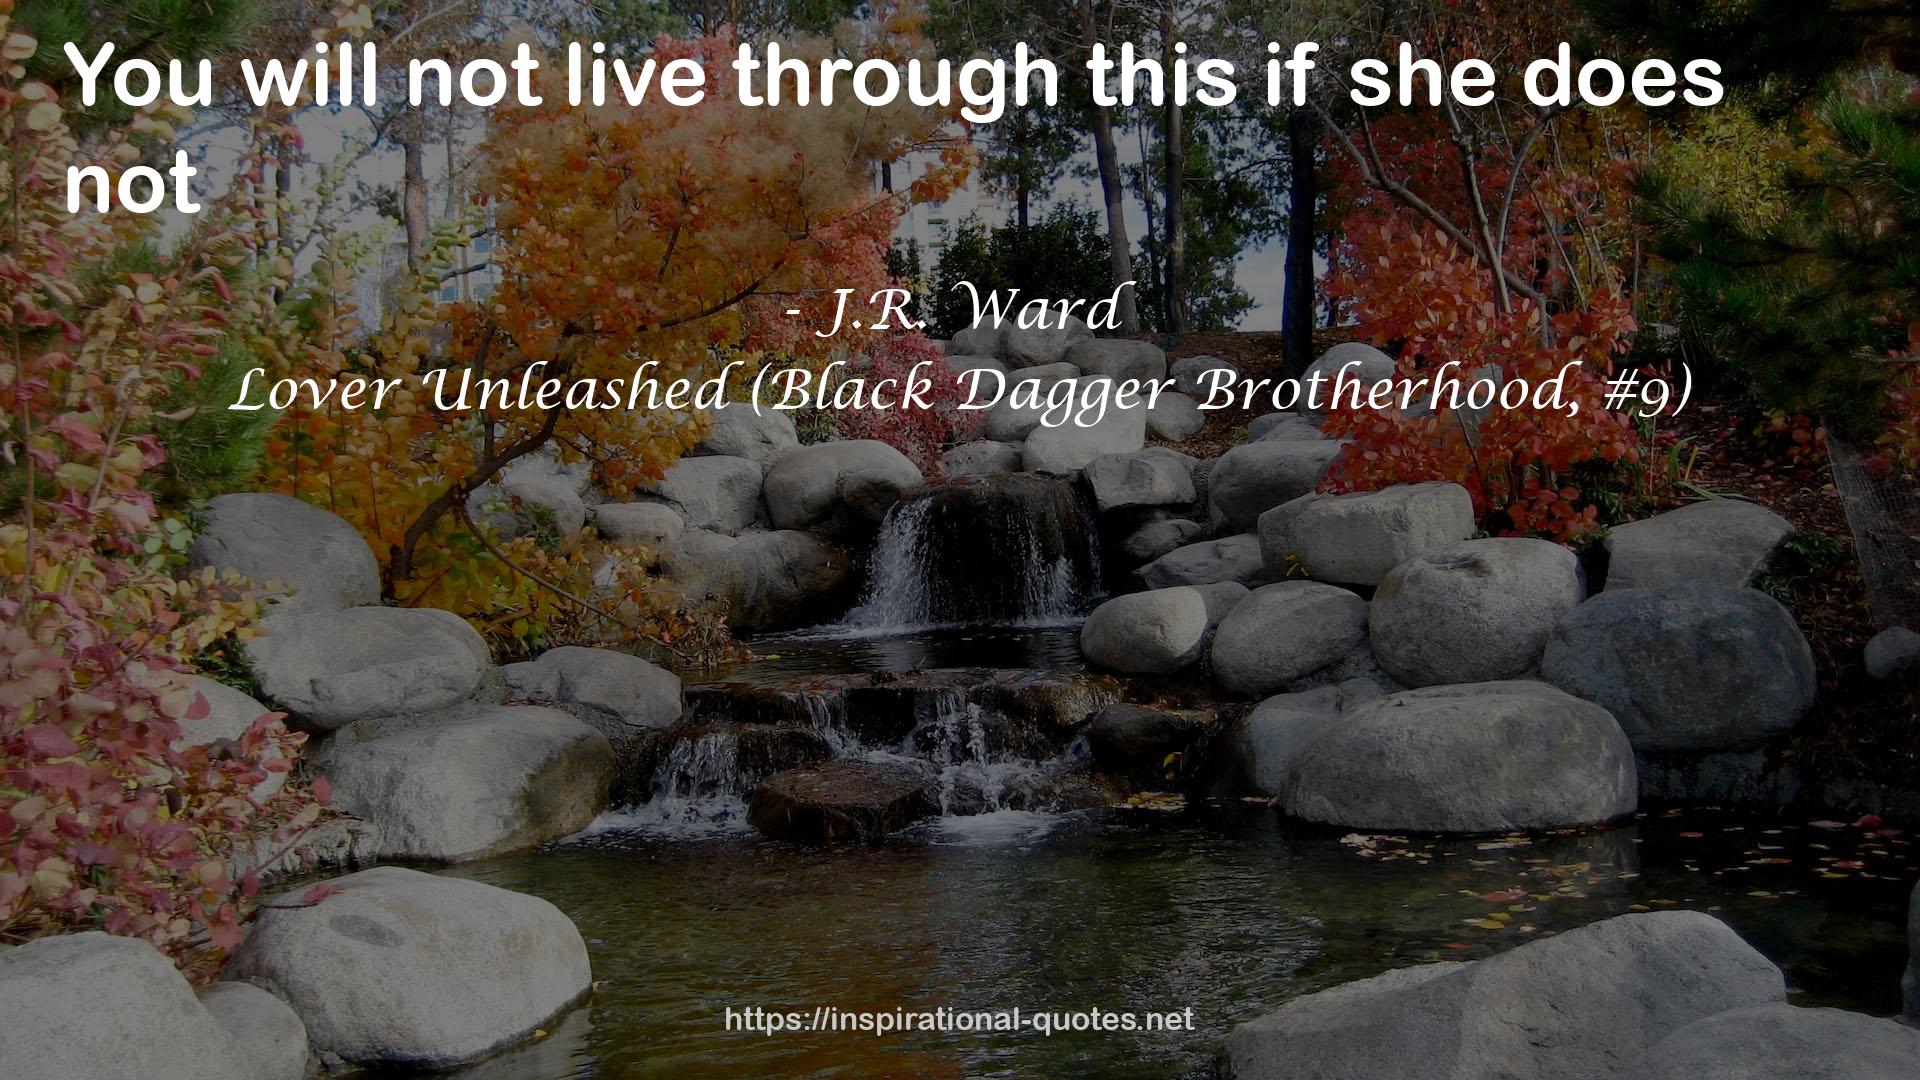 Lover Unleashed (Black Dagger Brotherhood, #9) QUOTES